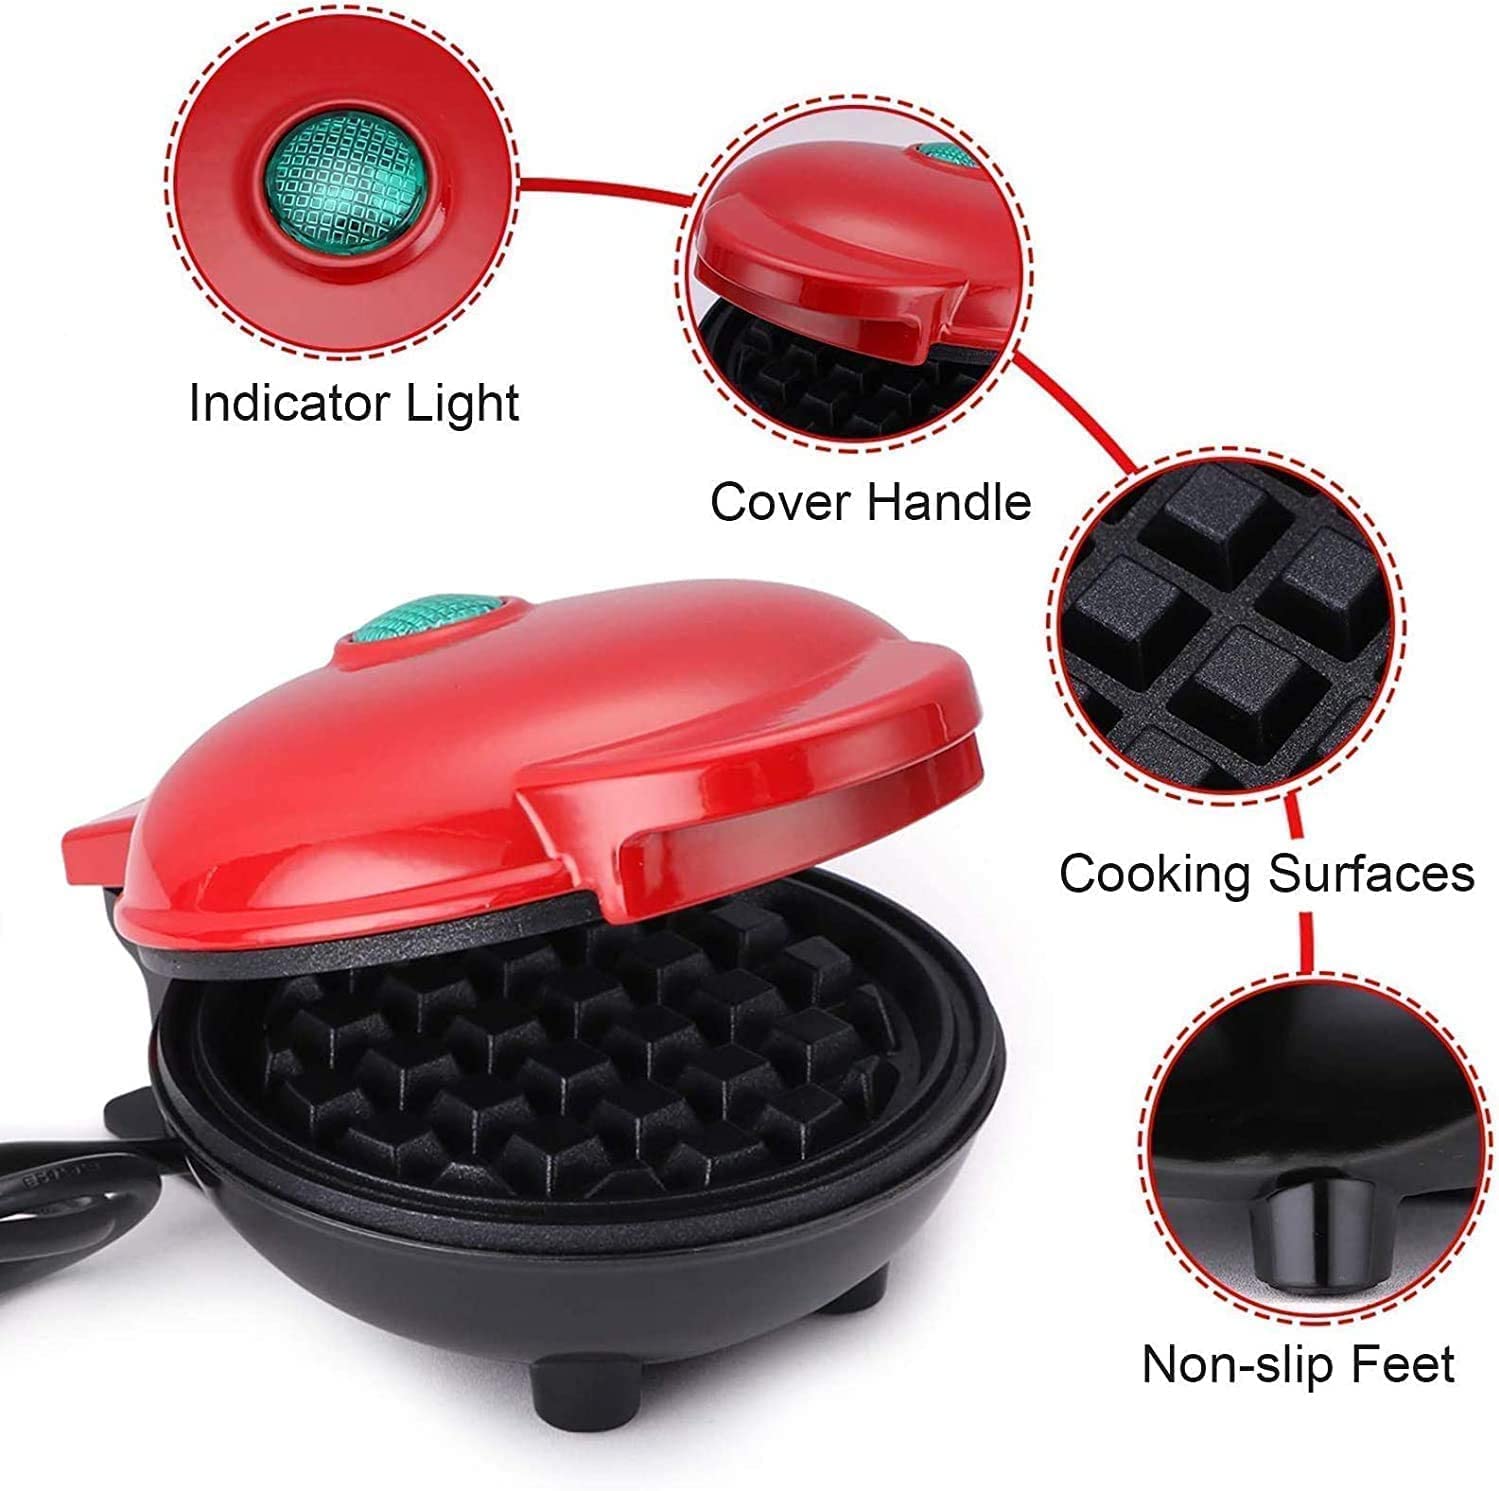 Create Delicious and Fun Mini Waffles with Our Compact 4-Inch Waffle Maker!